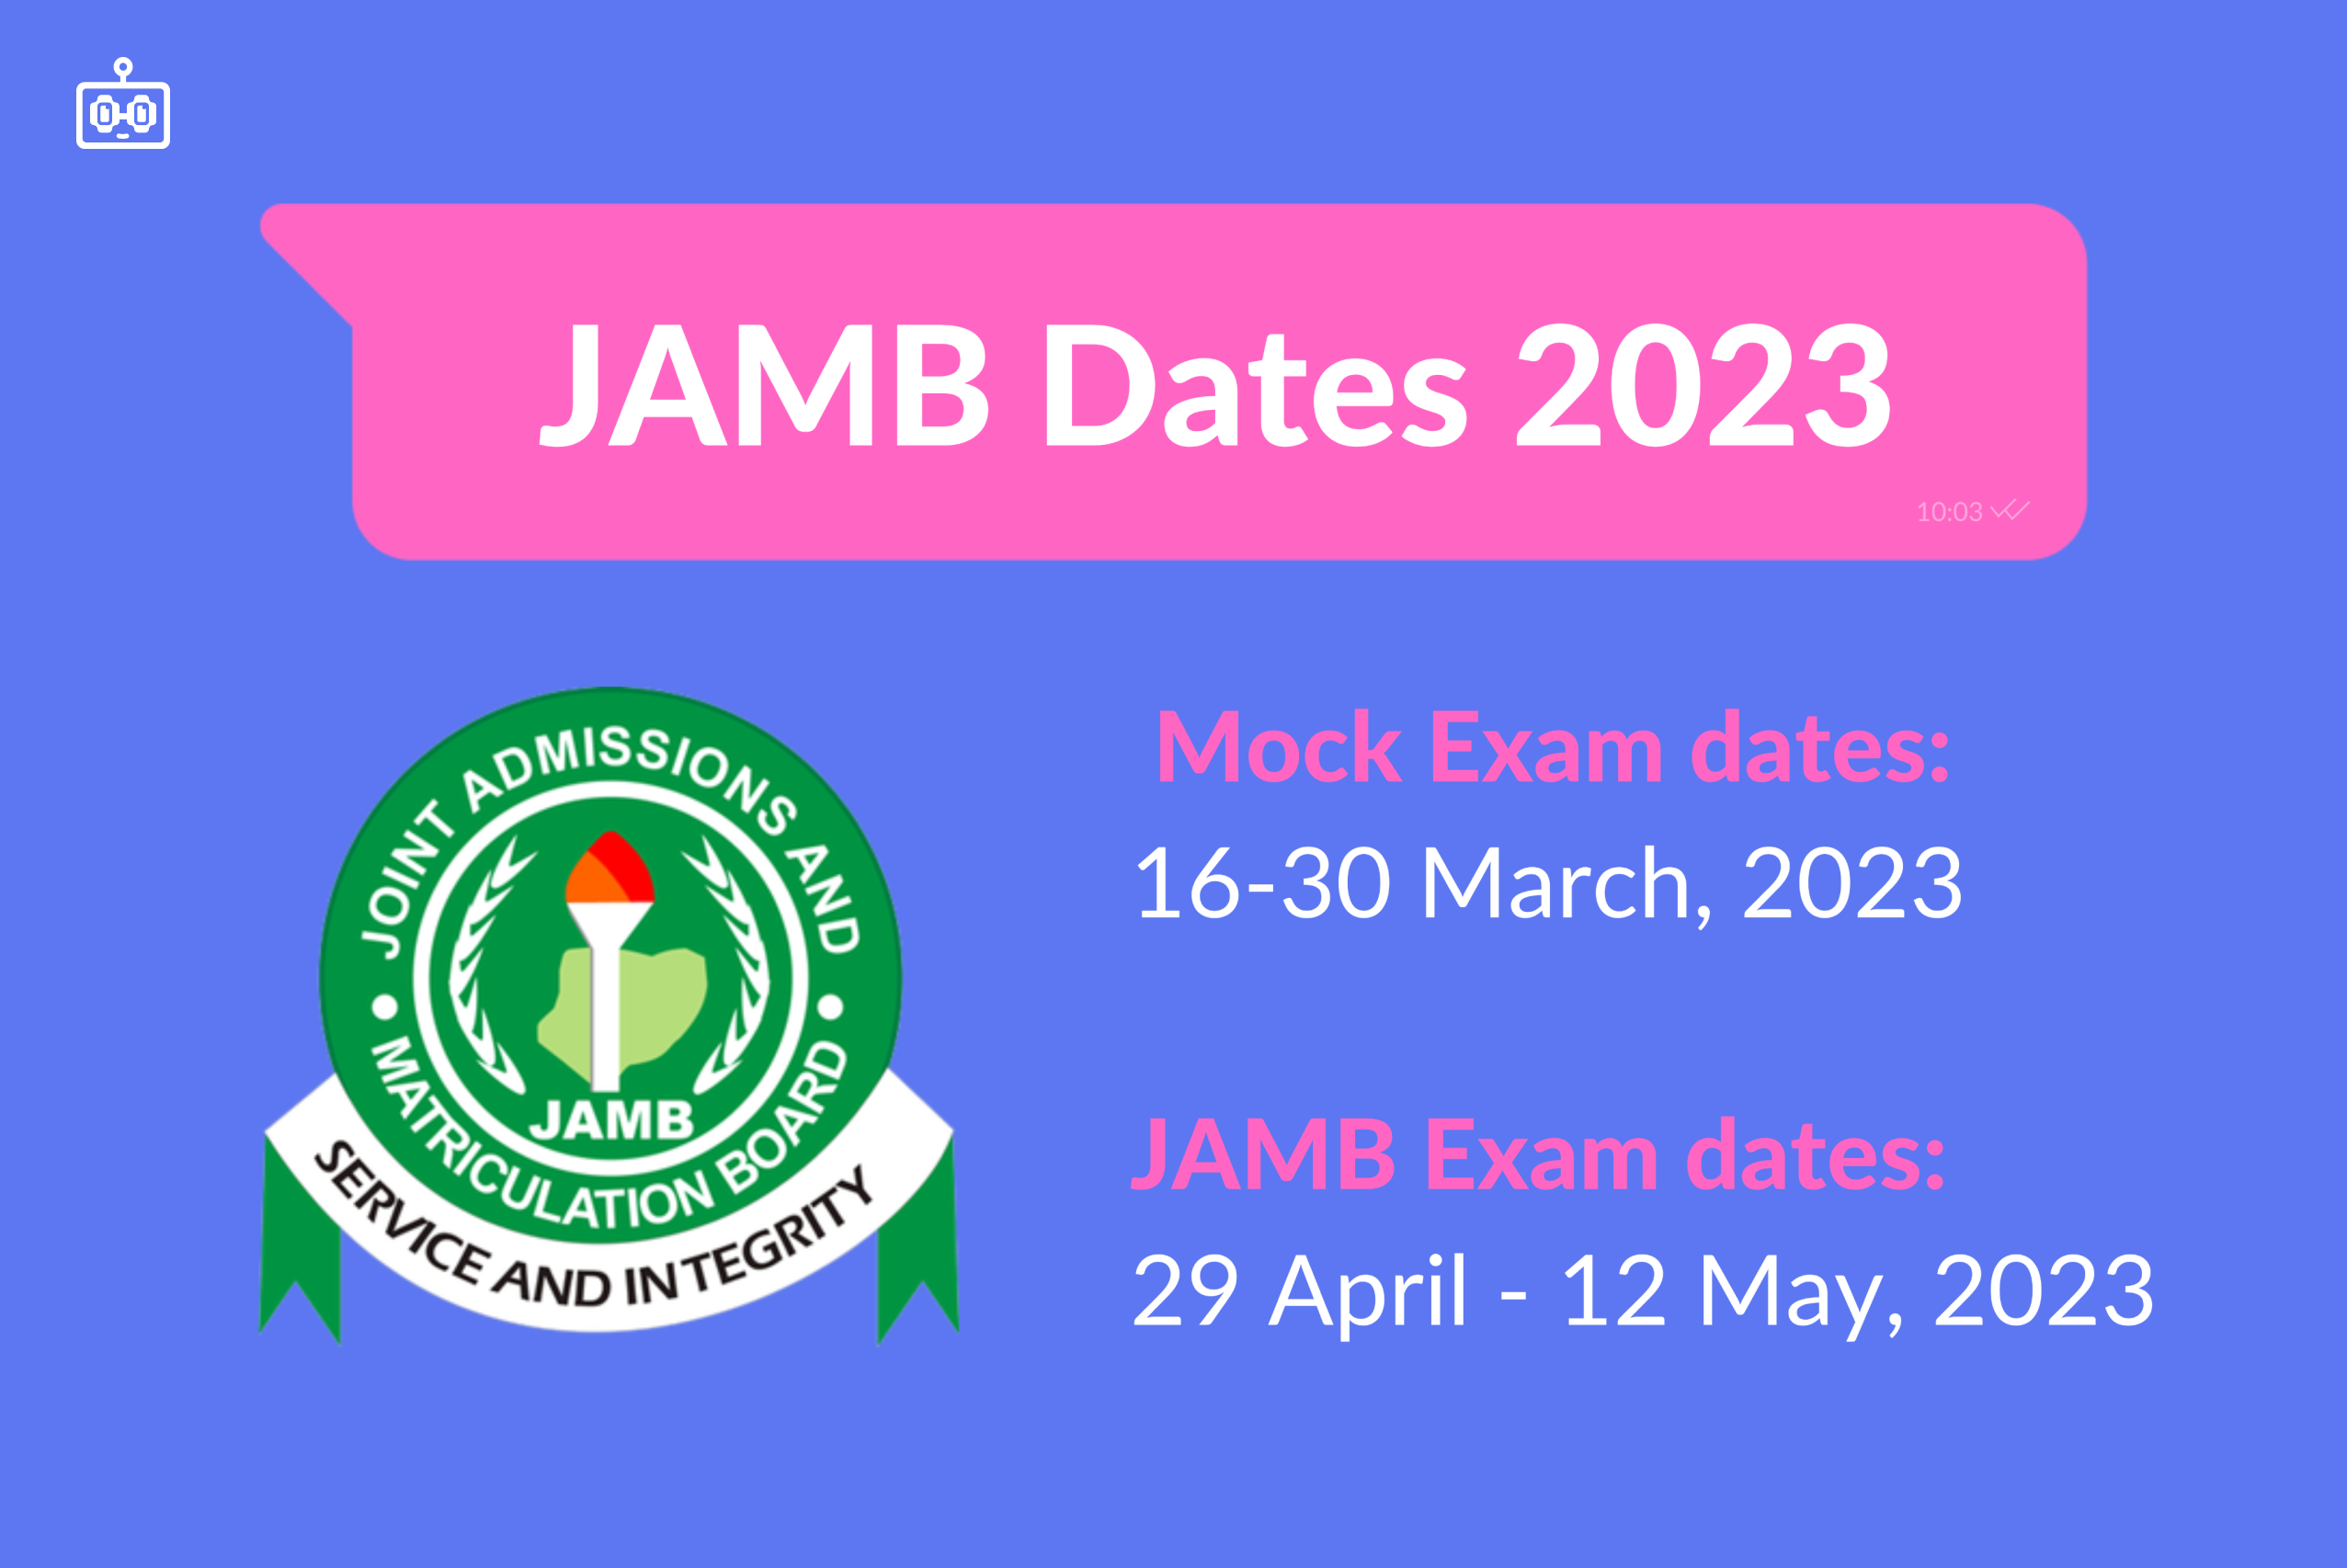 When is JAMB 2023? These are the dates for the 2023 JAMB exams. Mock Exam dates: 16-30 March 2023 JAMB Exam dates: 29 April - 12 May, 2023